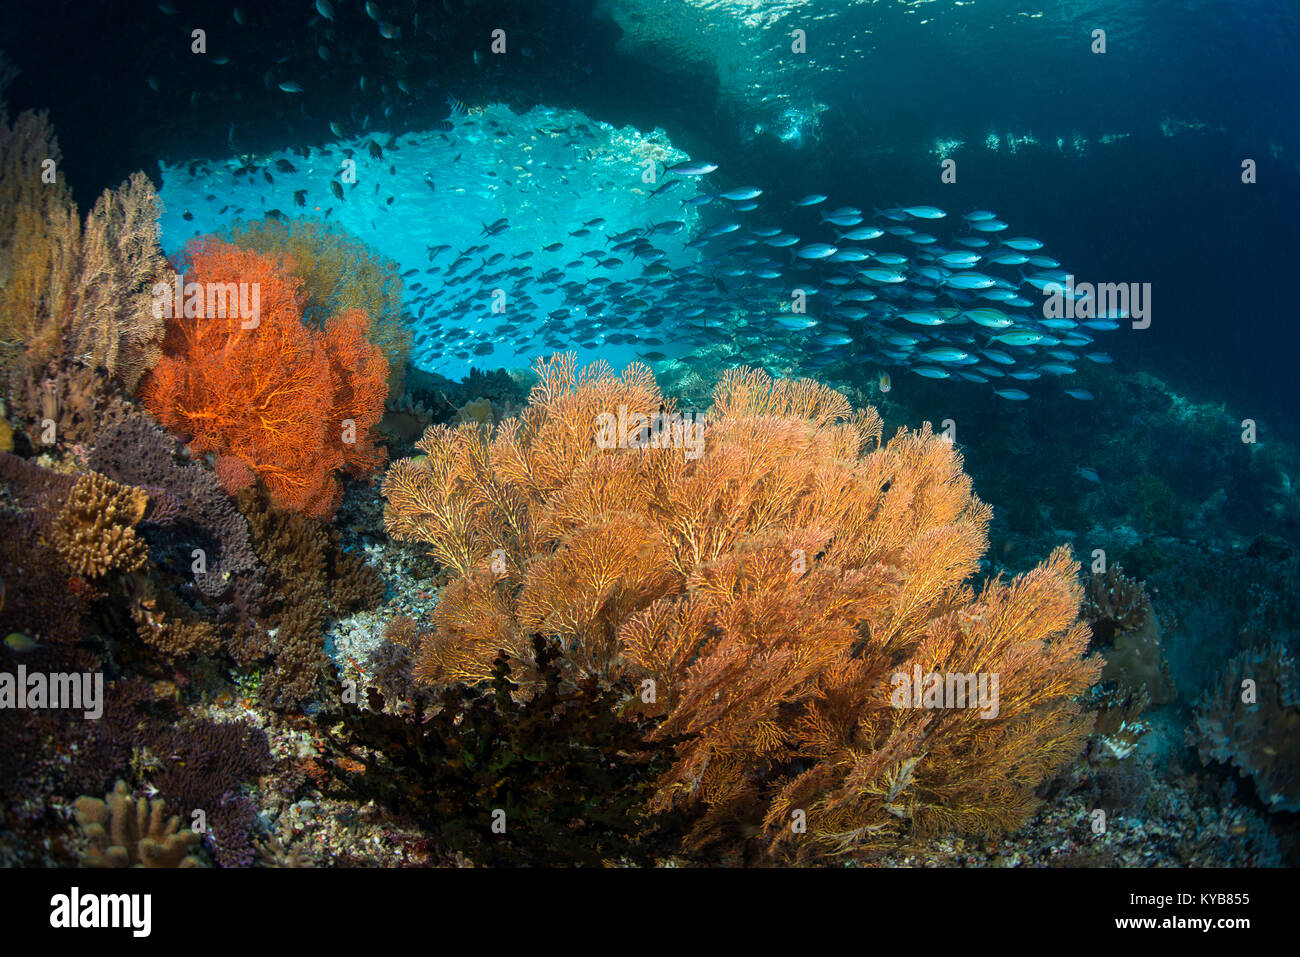 A school of fusilier fish swim through an underwater arch, over colourful gorgonian sea fans at Penemu in the Raja Ampat islands, Indonesia. Stock Photo